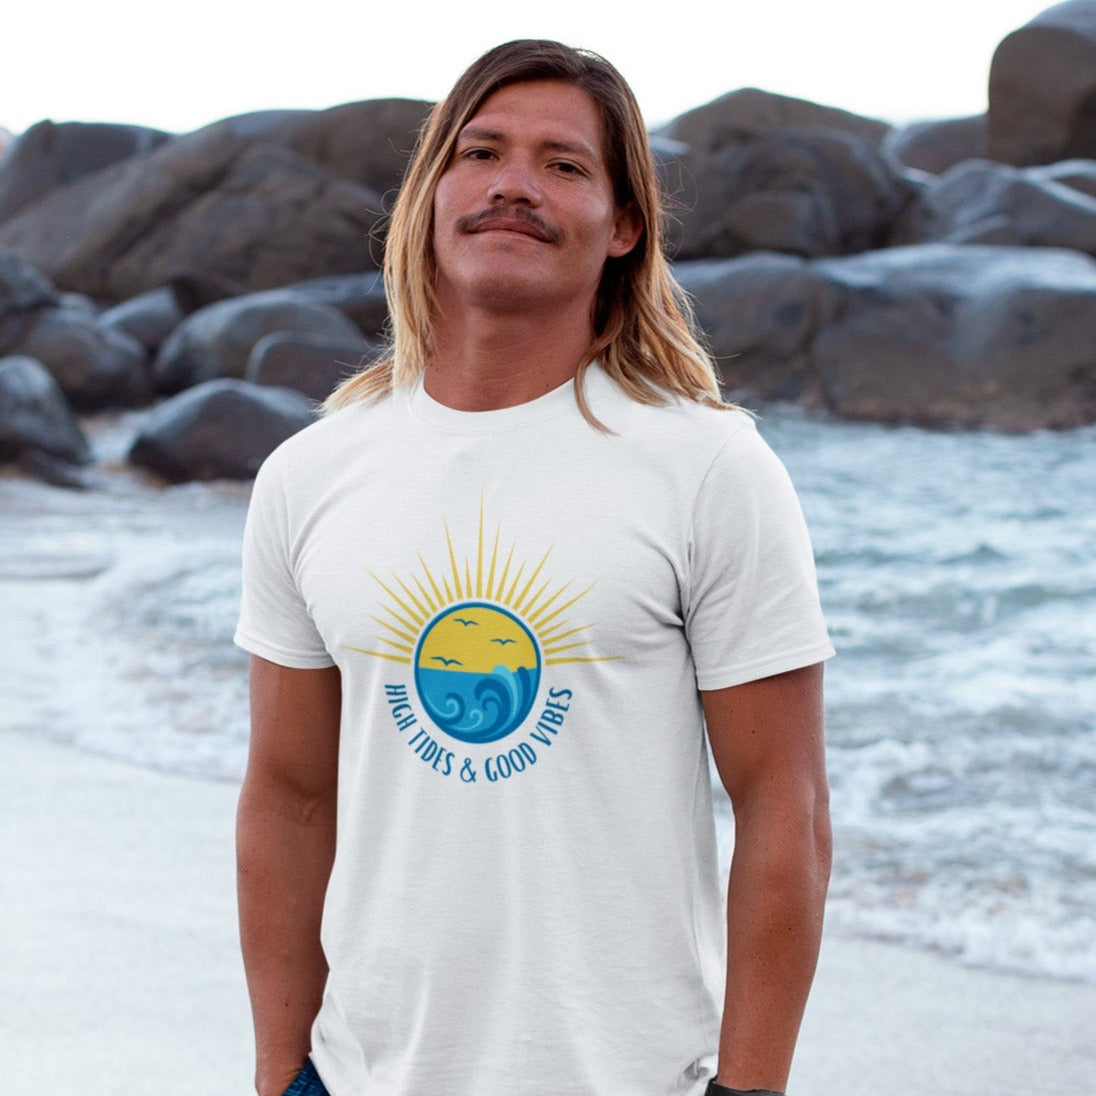 high-tides-and-good-vibes-white-t-shirt-beach-sunset-unisex-mockup-of-a-blonde-long-haired-man-barefoot-at-the-beach